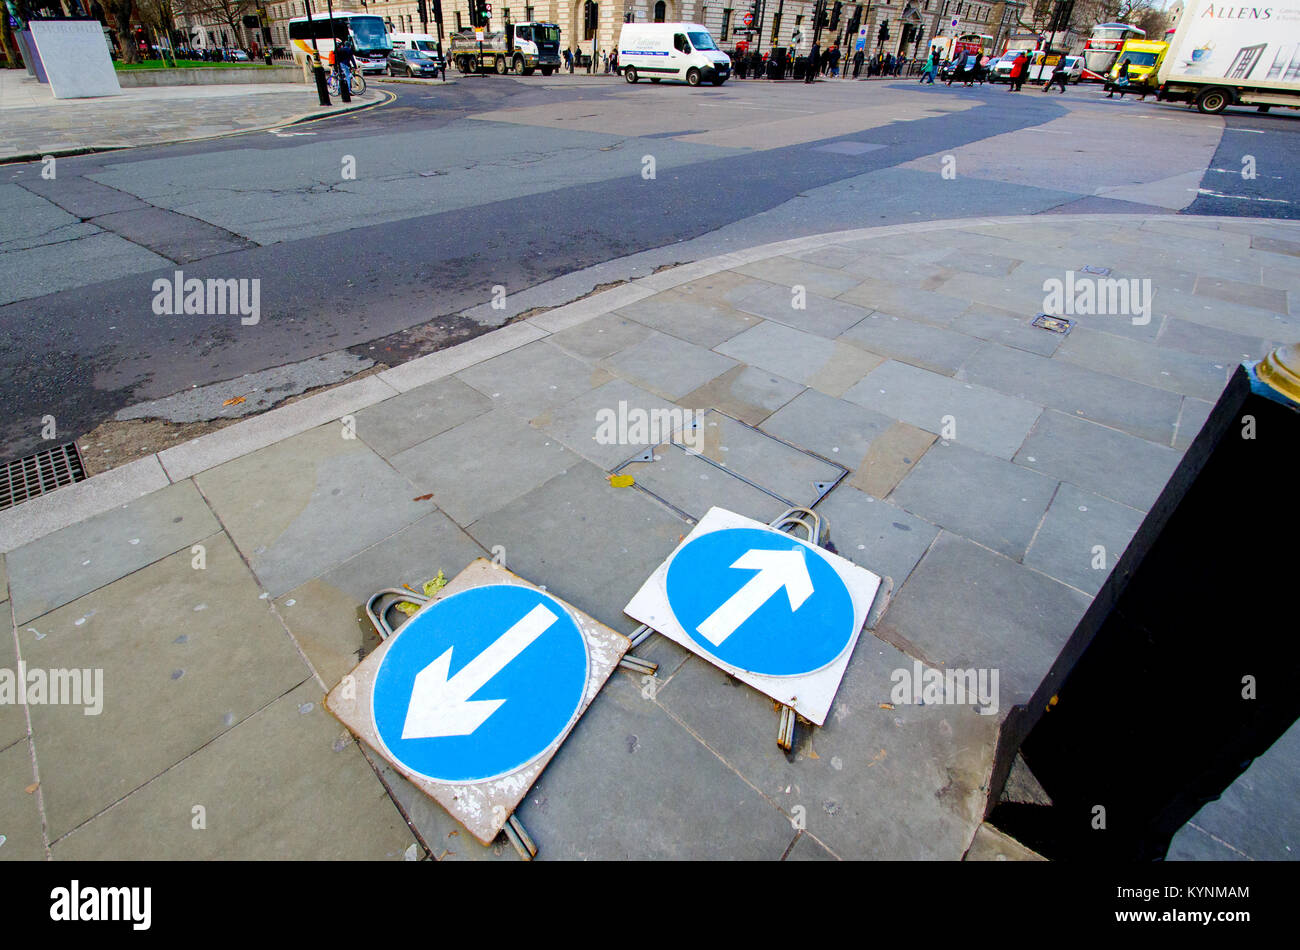 London, England, UK. Traffic arrow signs lying flat on the pavement pointing in different directions, in Parliament Square Stock Photo